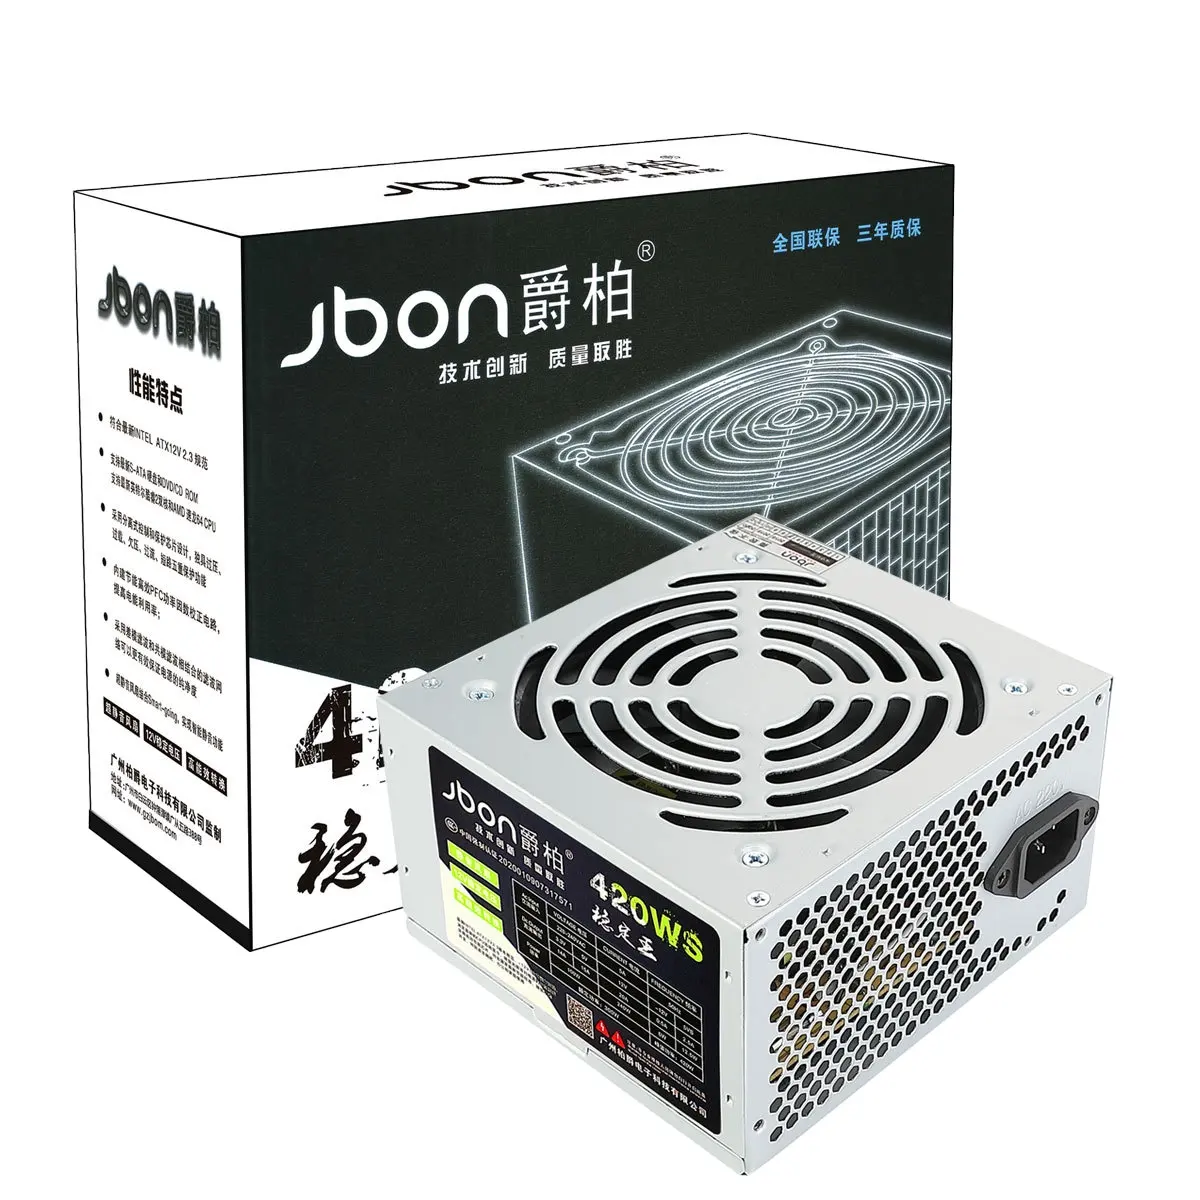 For Juebei 420WS desktop computer power supply supports dual core quad core stable silent desktop computer host power supply